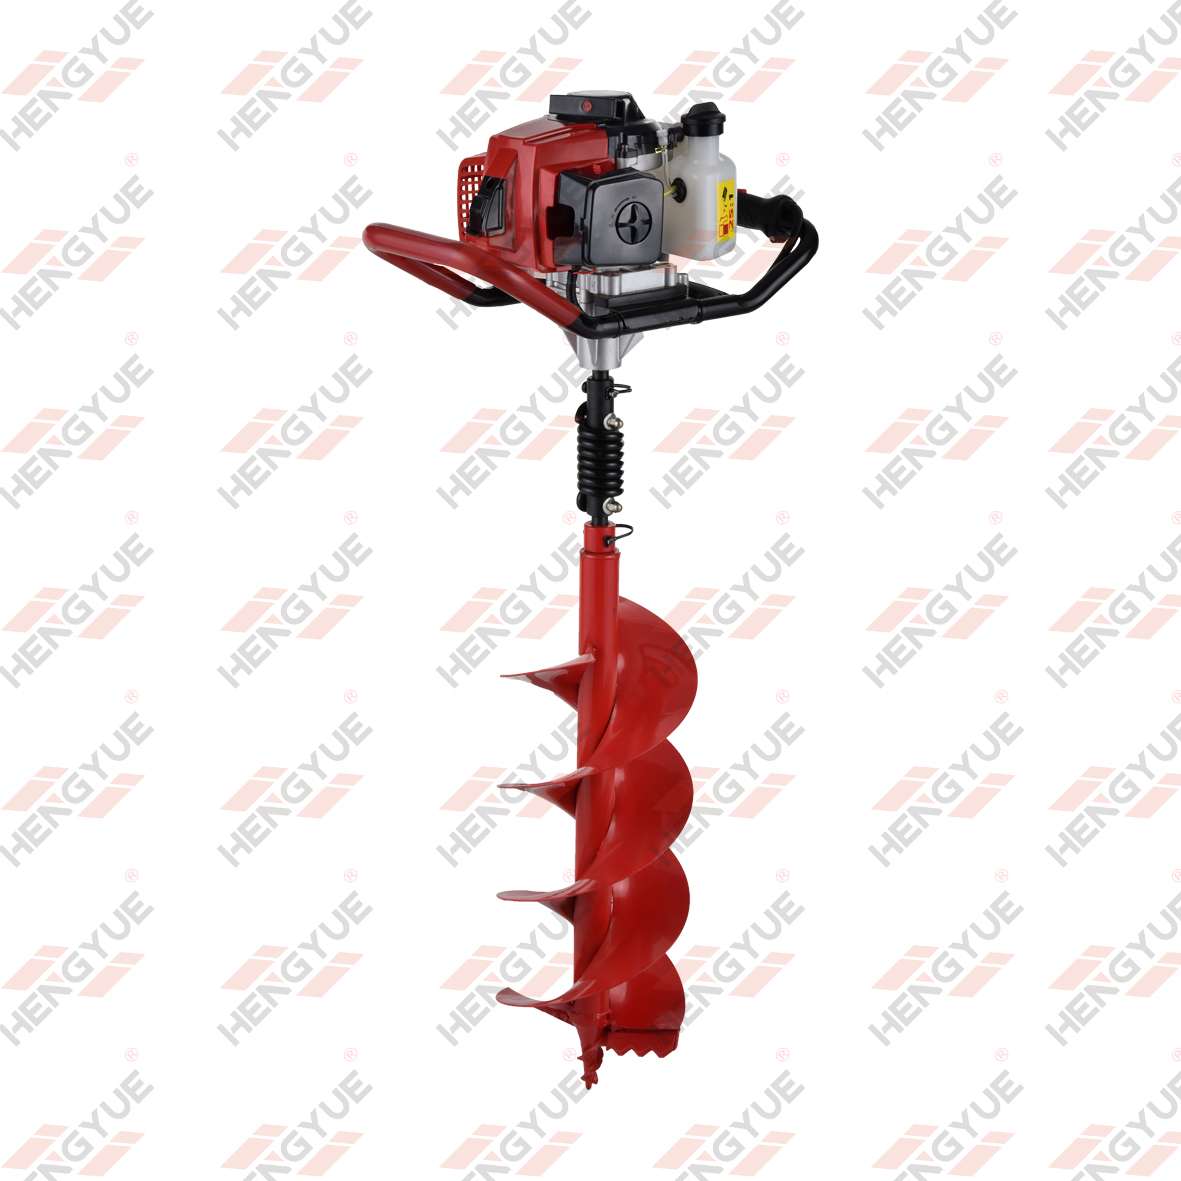 63/68cc 2 Stroke Engine Power Earth Auger